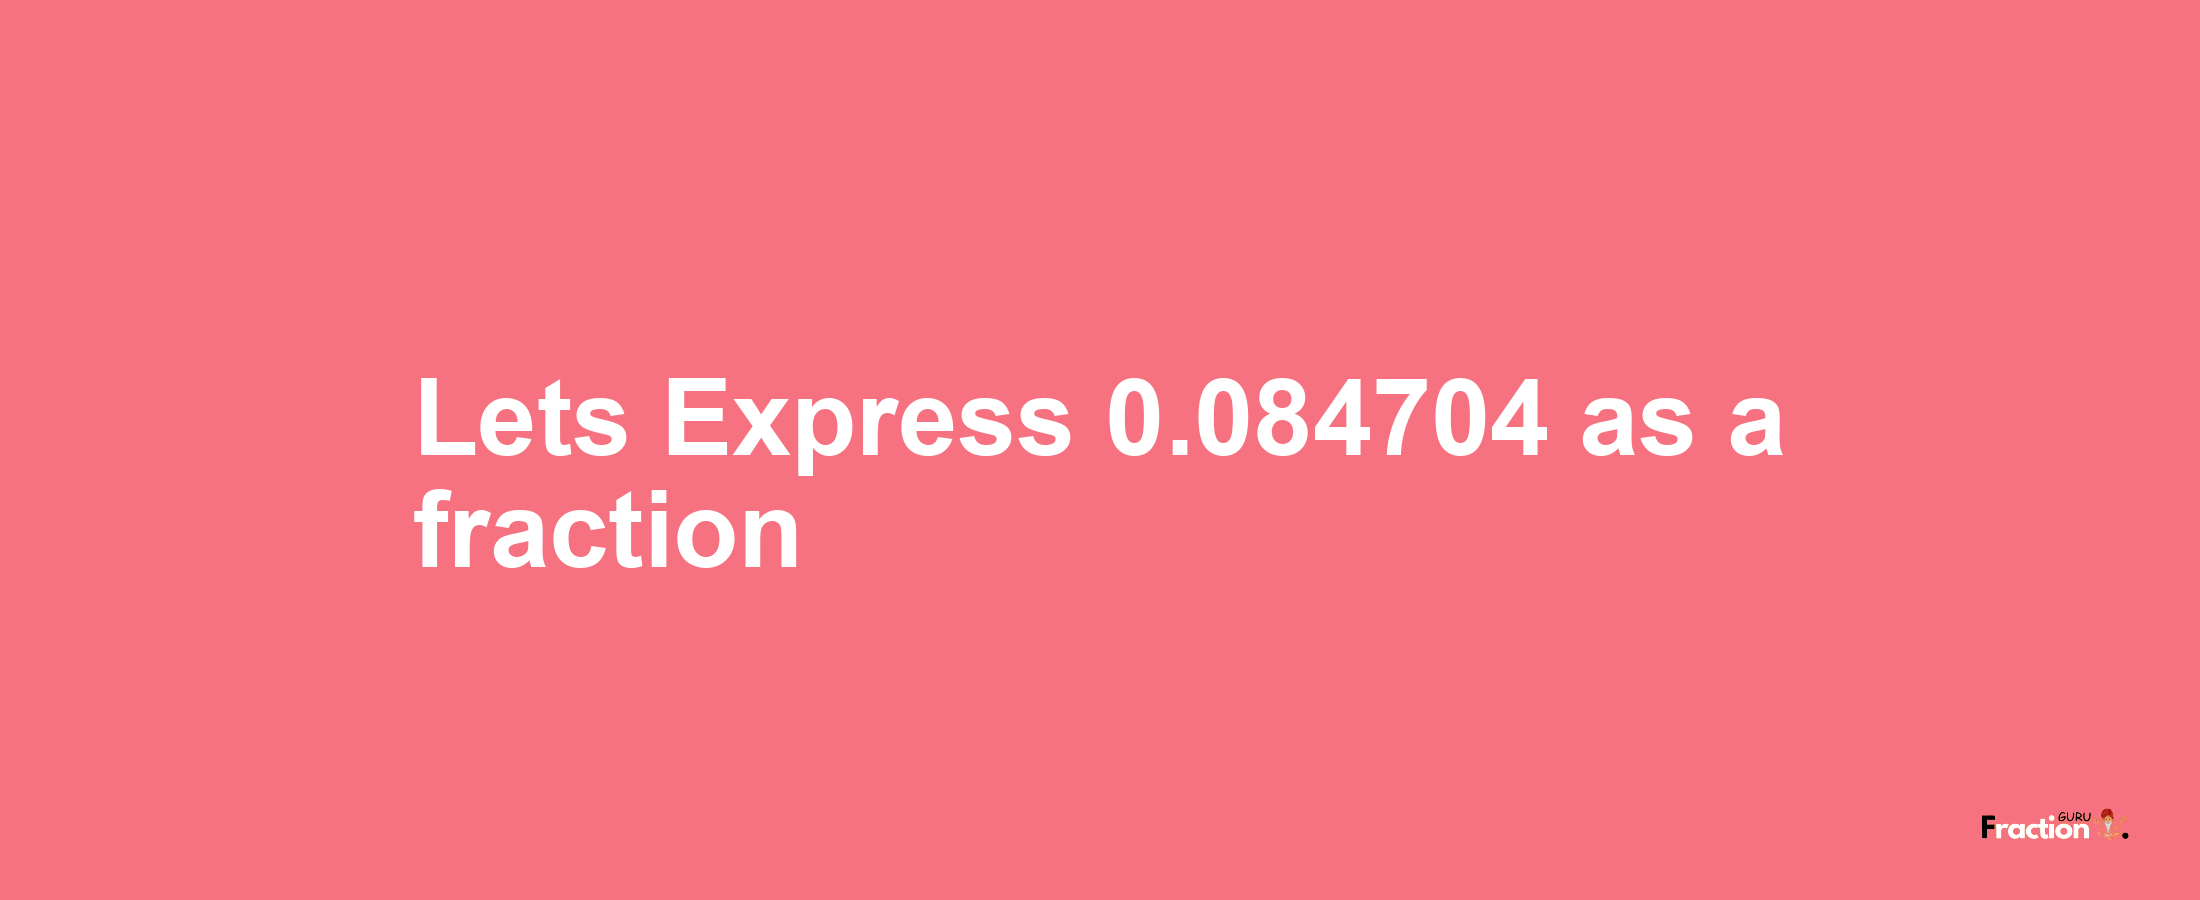 Lets Express 0.084704 as afraction